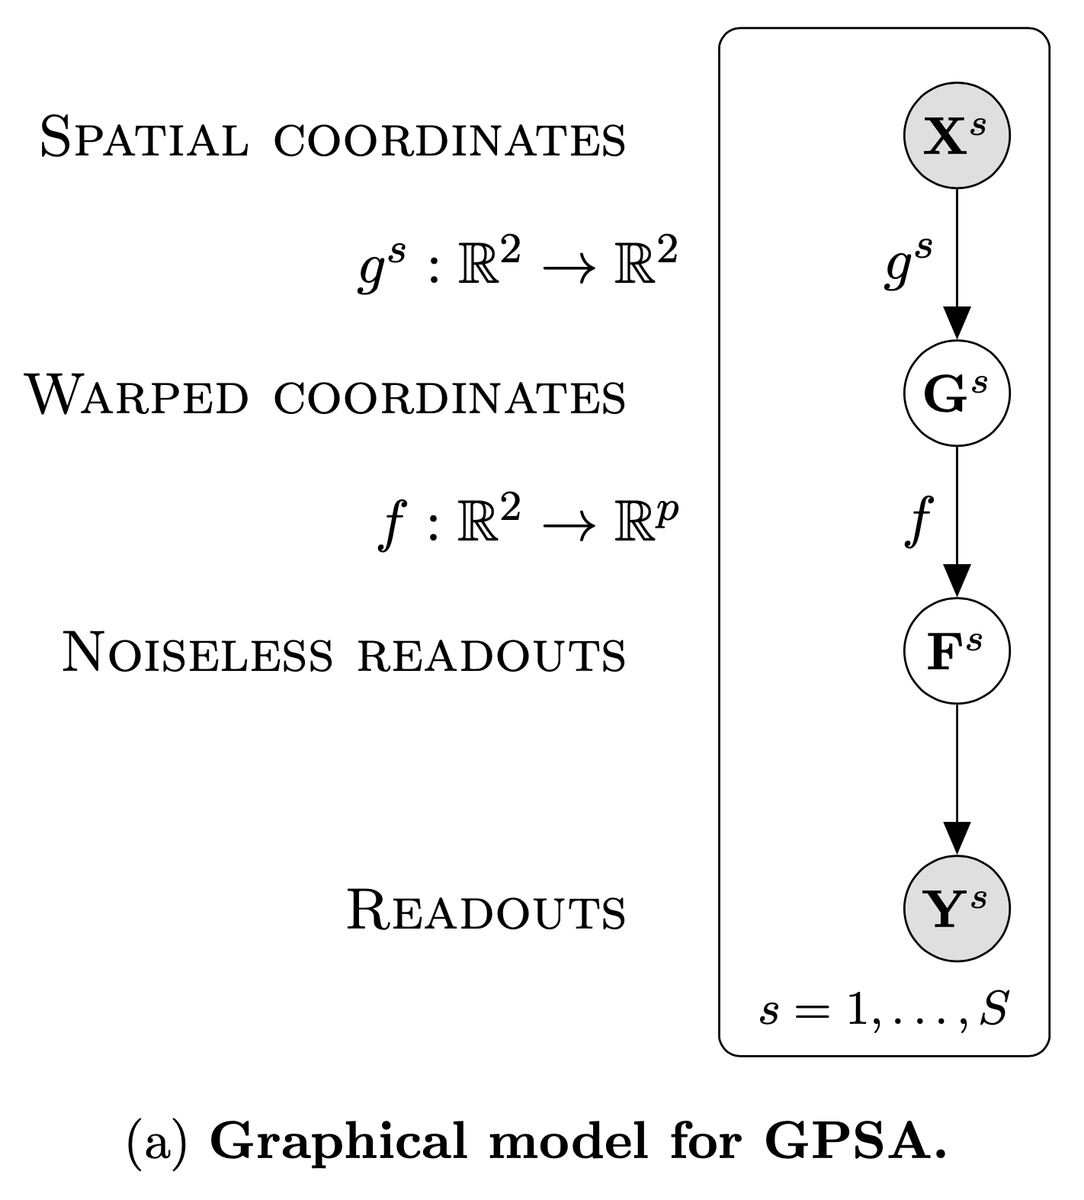 gpsa graphical model